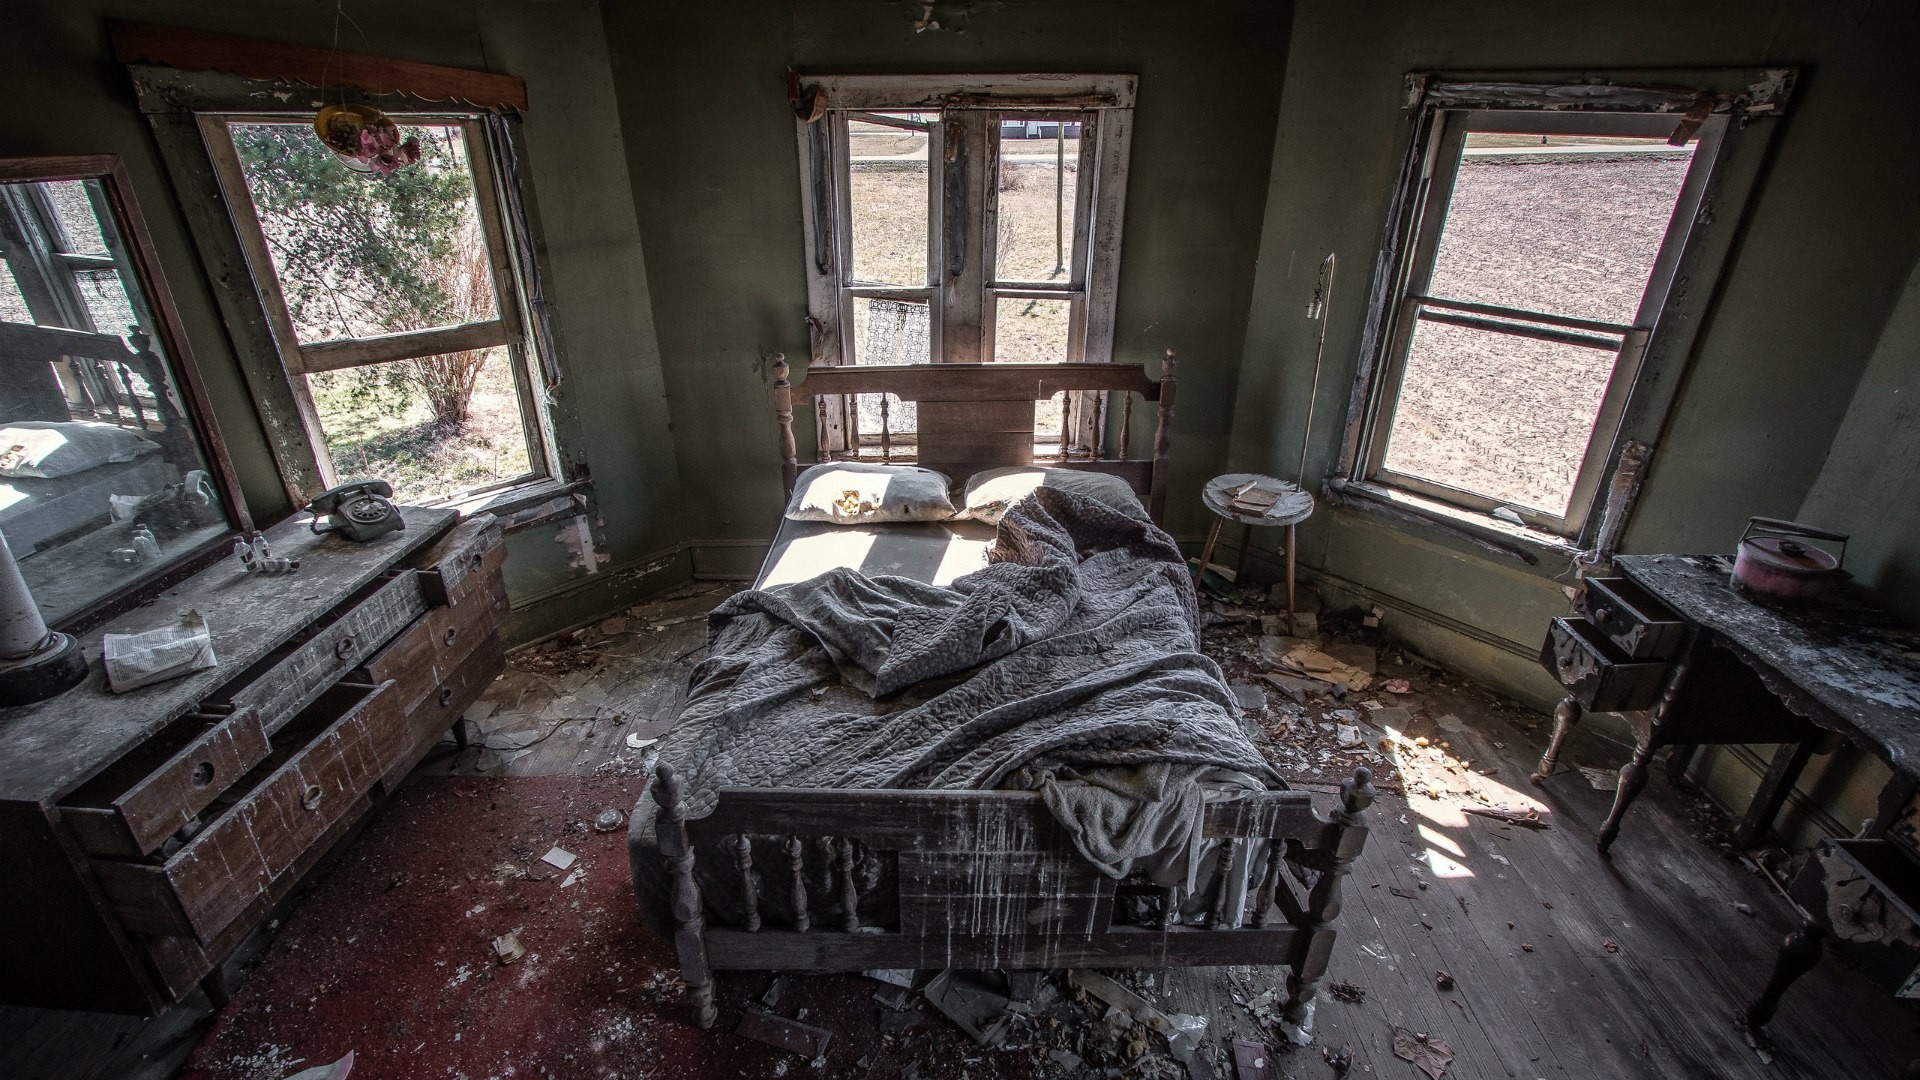 1920x1080 Pin by Kathryn Sullivan on What Every Girl Should Know | Pinterest |  Mansion bedroom, Abandoned houses and Abandoned